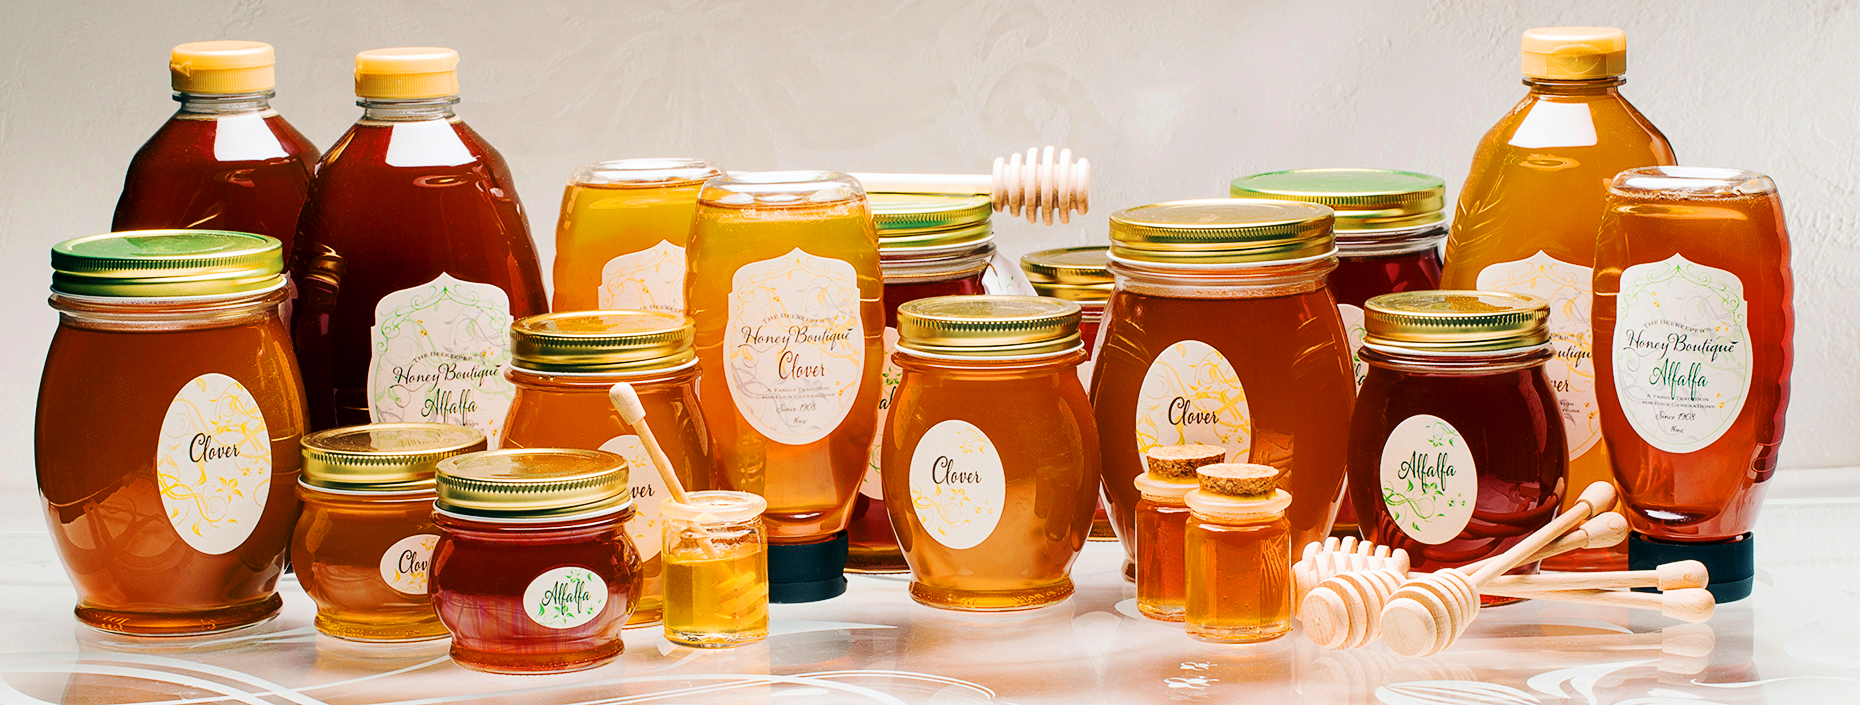 Honey products, The Beekeeper